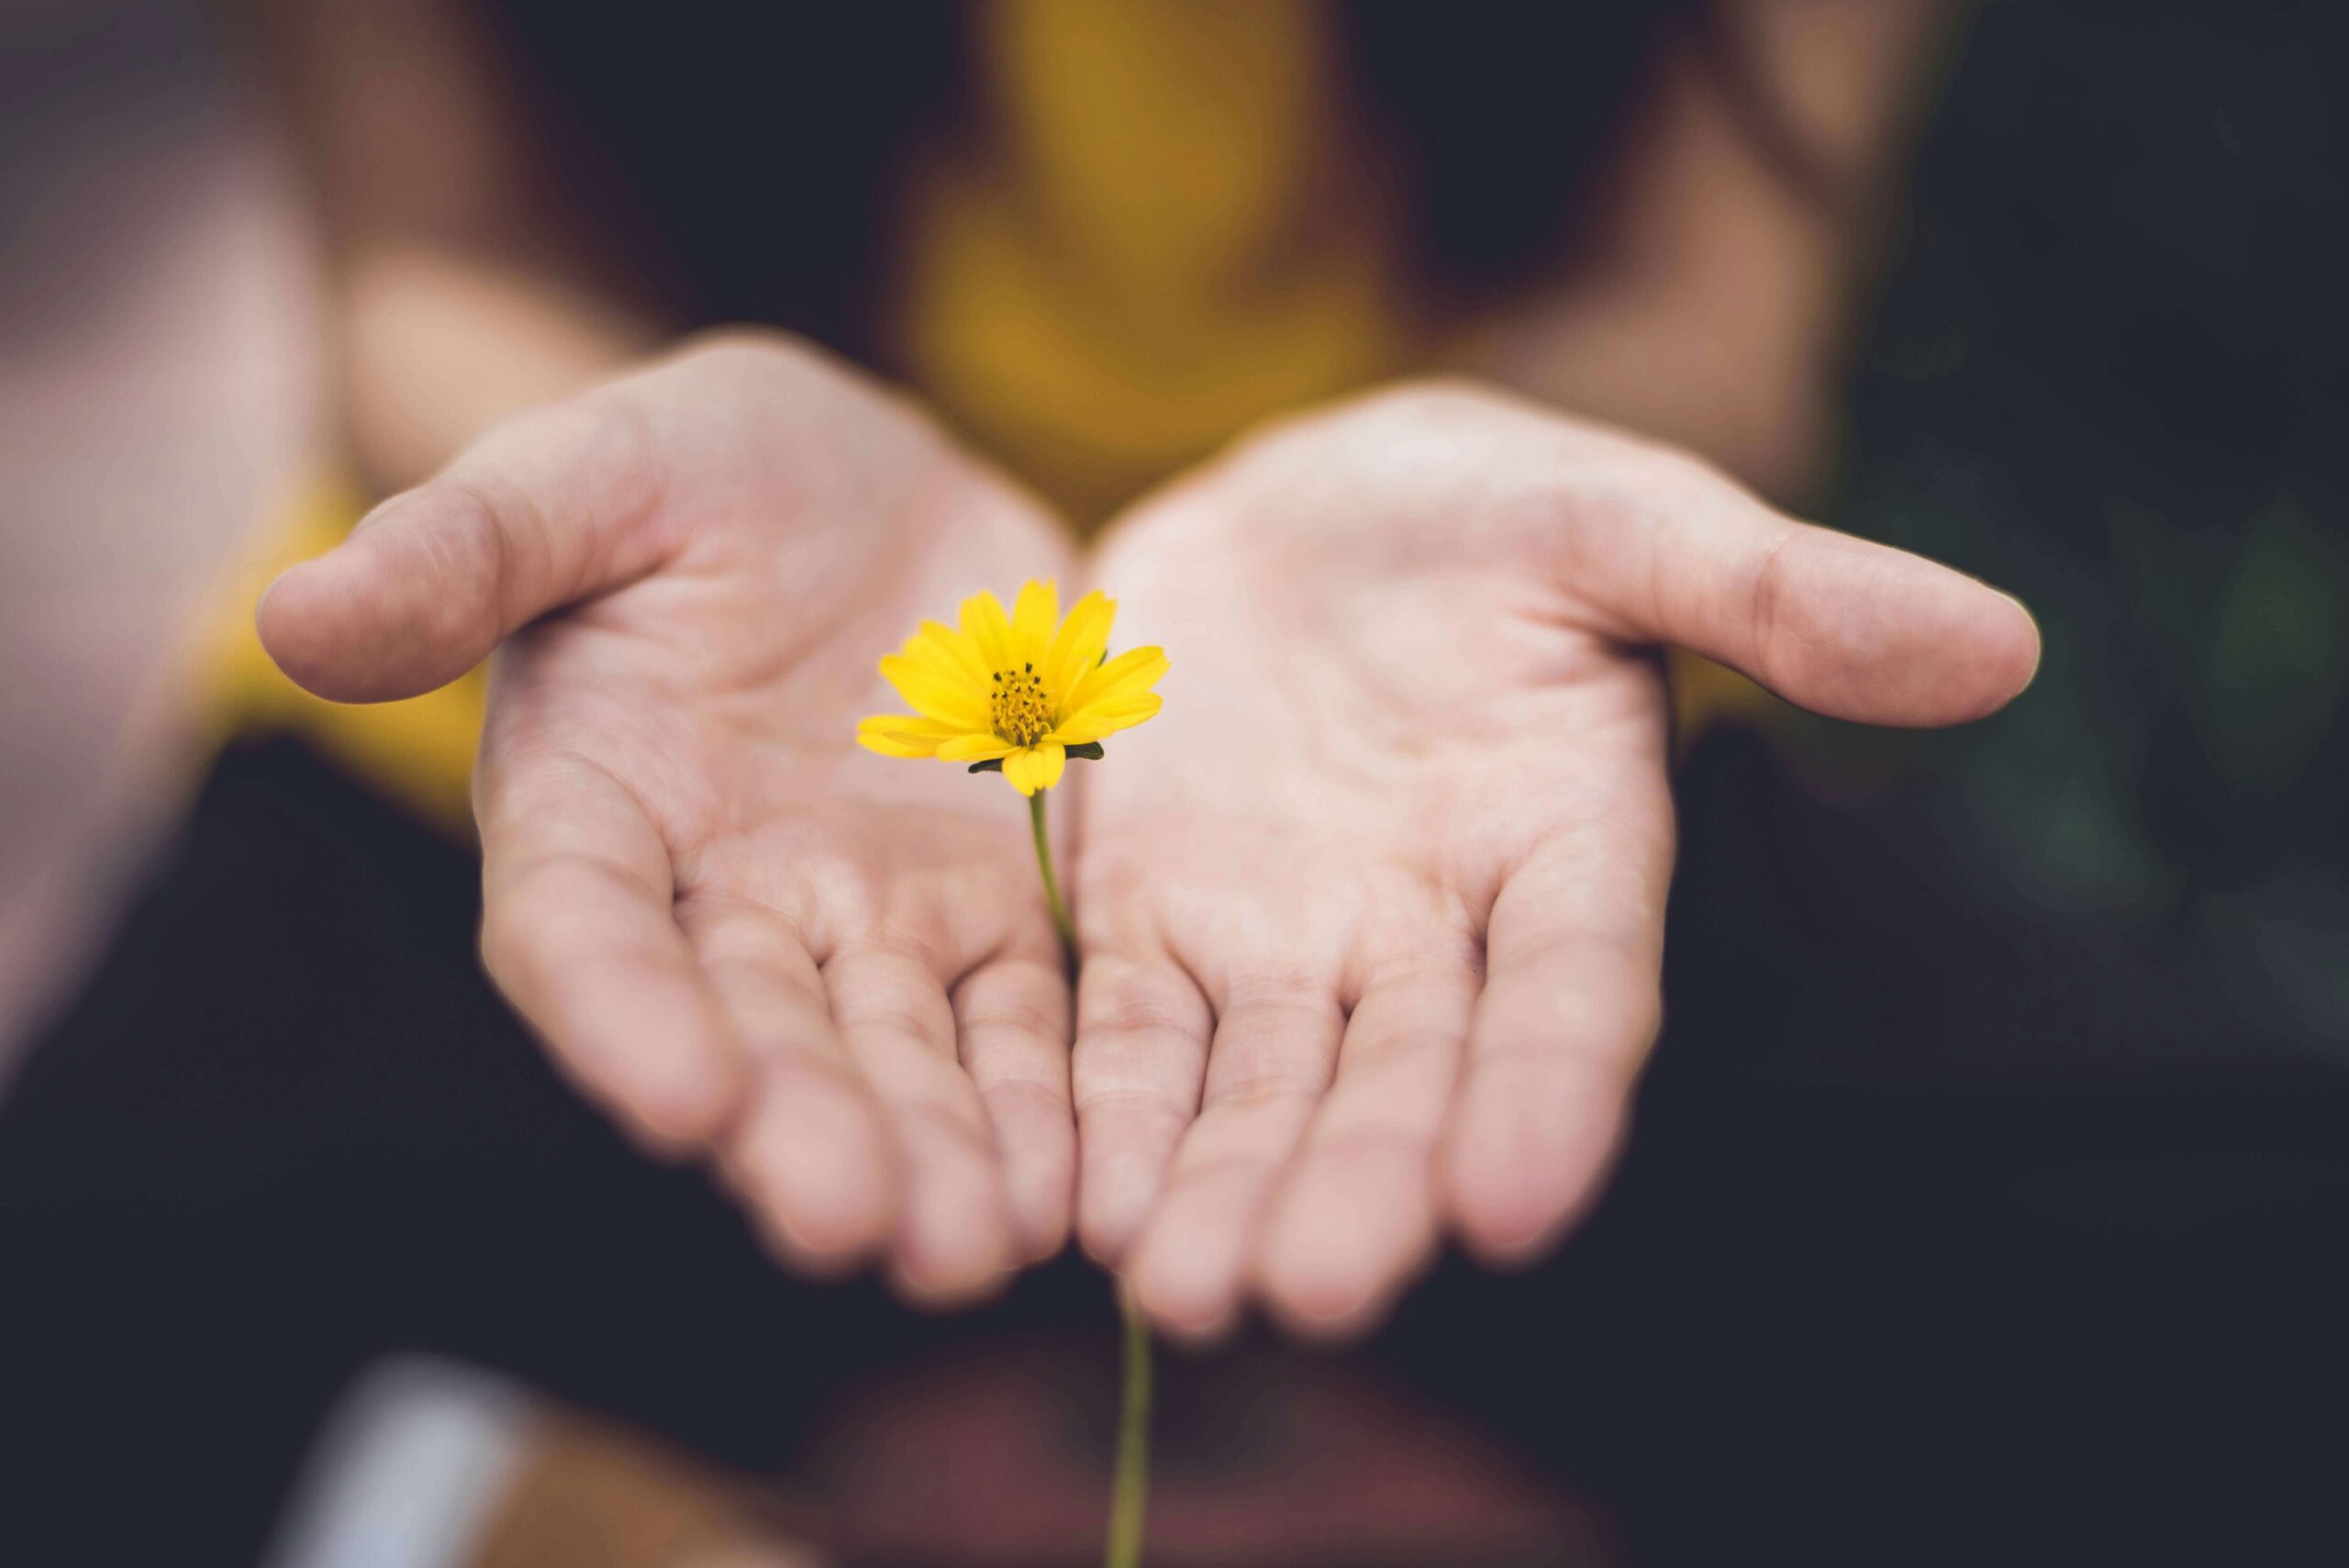 A woman holding a small yellow flower. If you are looking for a therapist for women's issues in NYC, NY, look no further! Learn more mindfulness tips here.